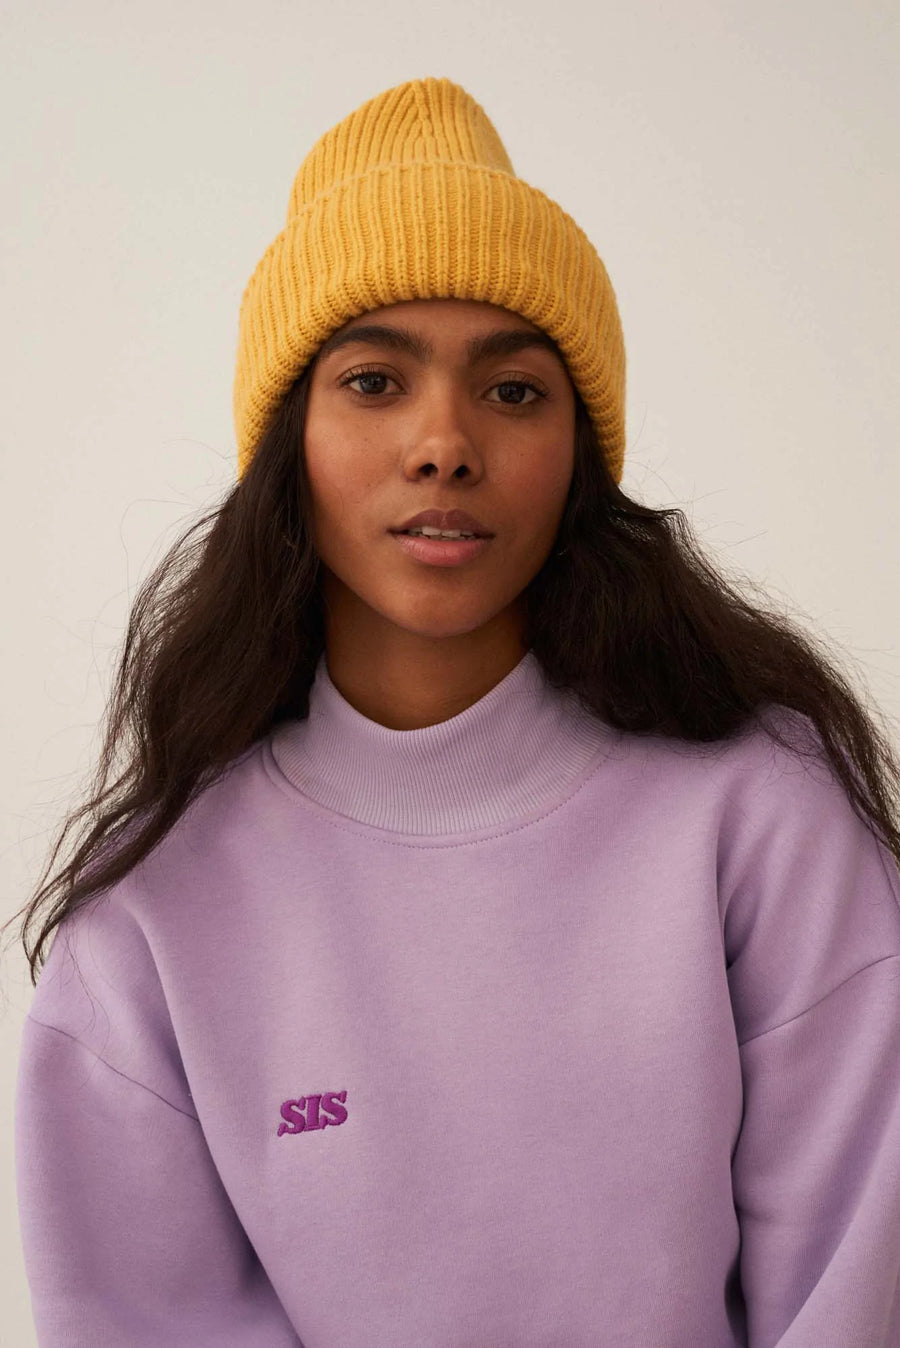 Les Goodies - She Is Sunday Violet sweater SIS